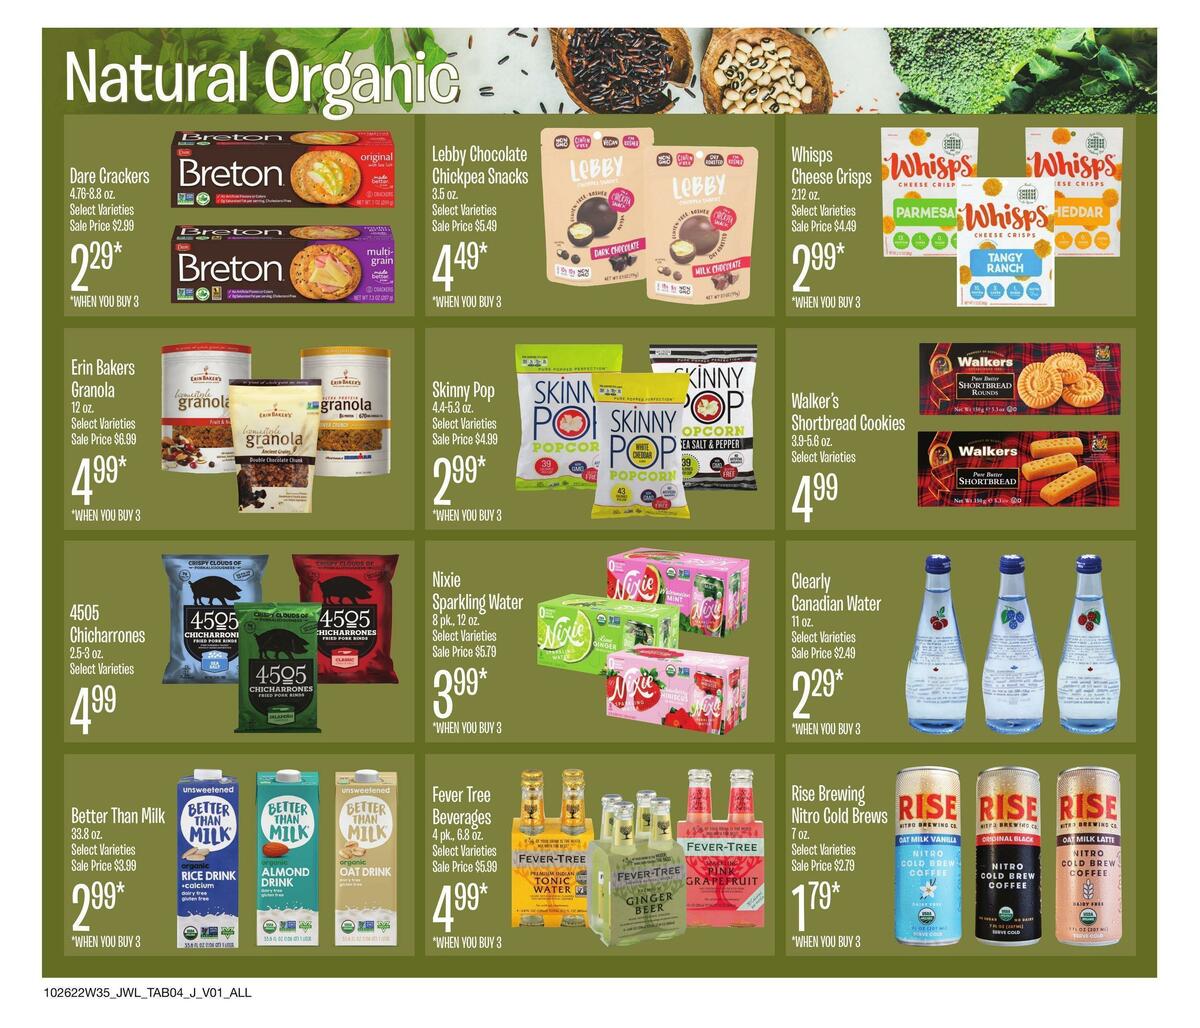 Jewel Osco Natural & Organic Weekly Ad from October 26